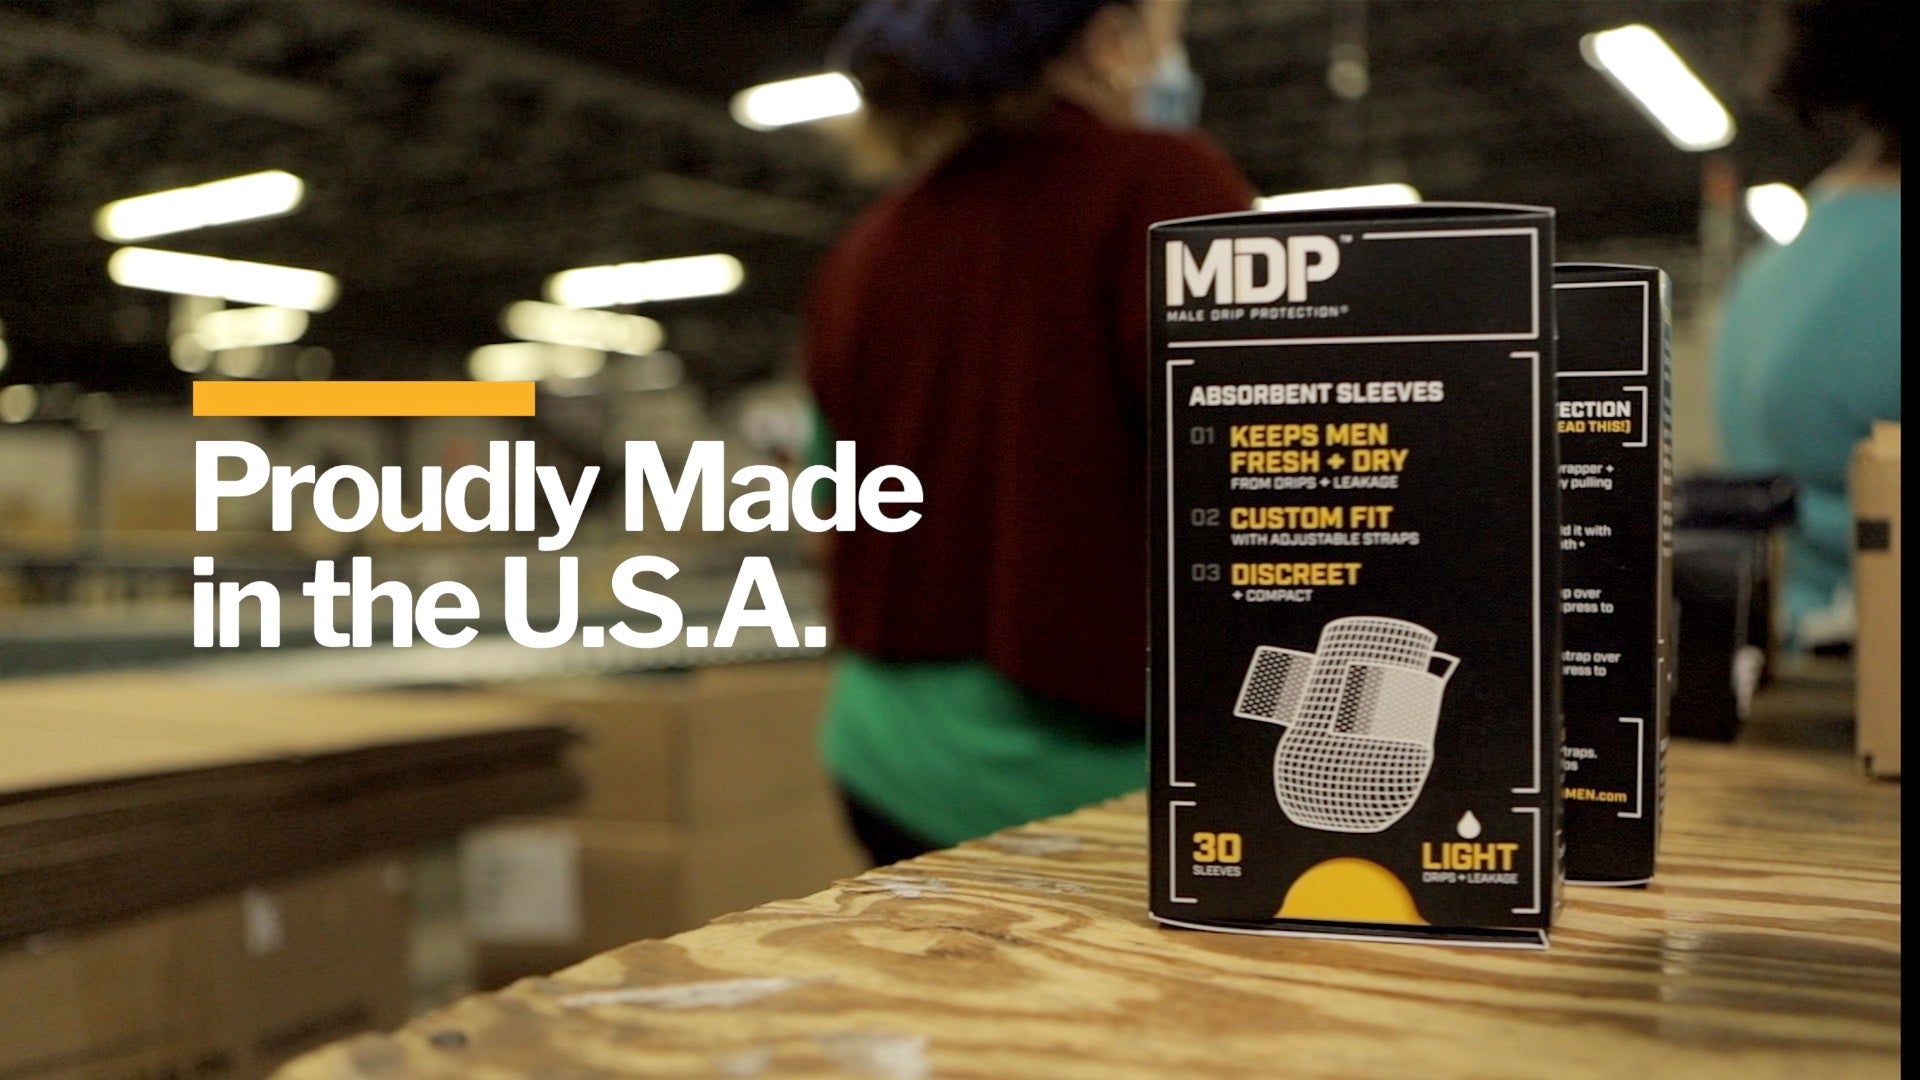 MDP - Male Drip Protection - Made in the USA